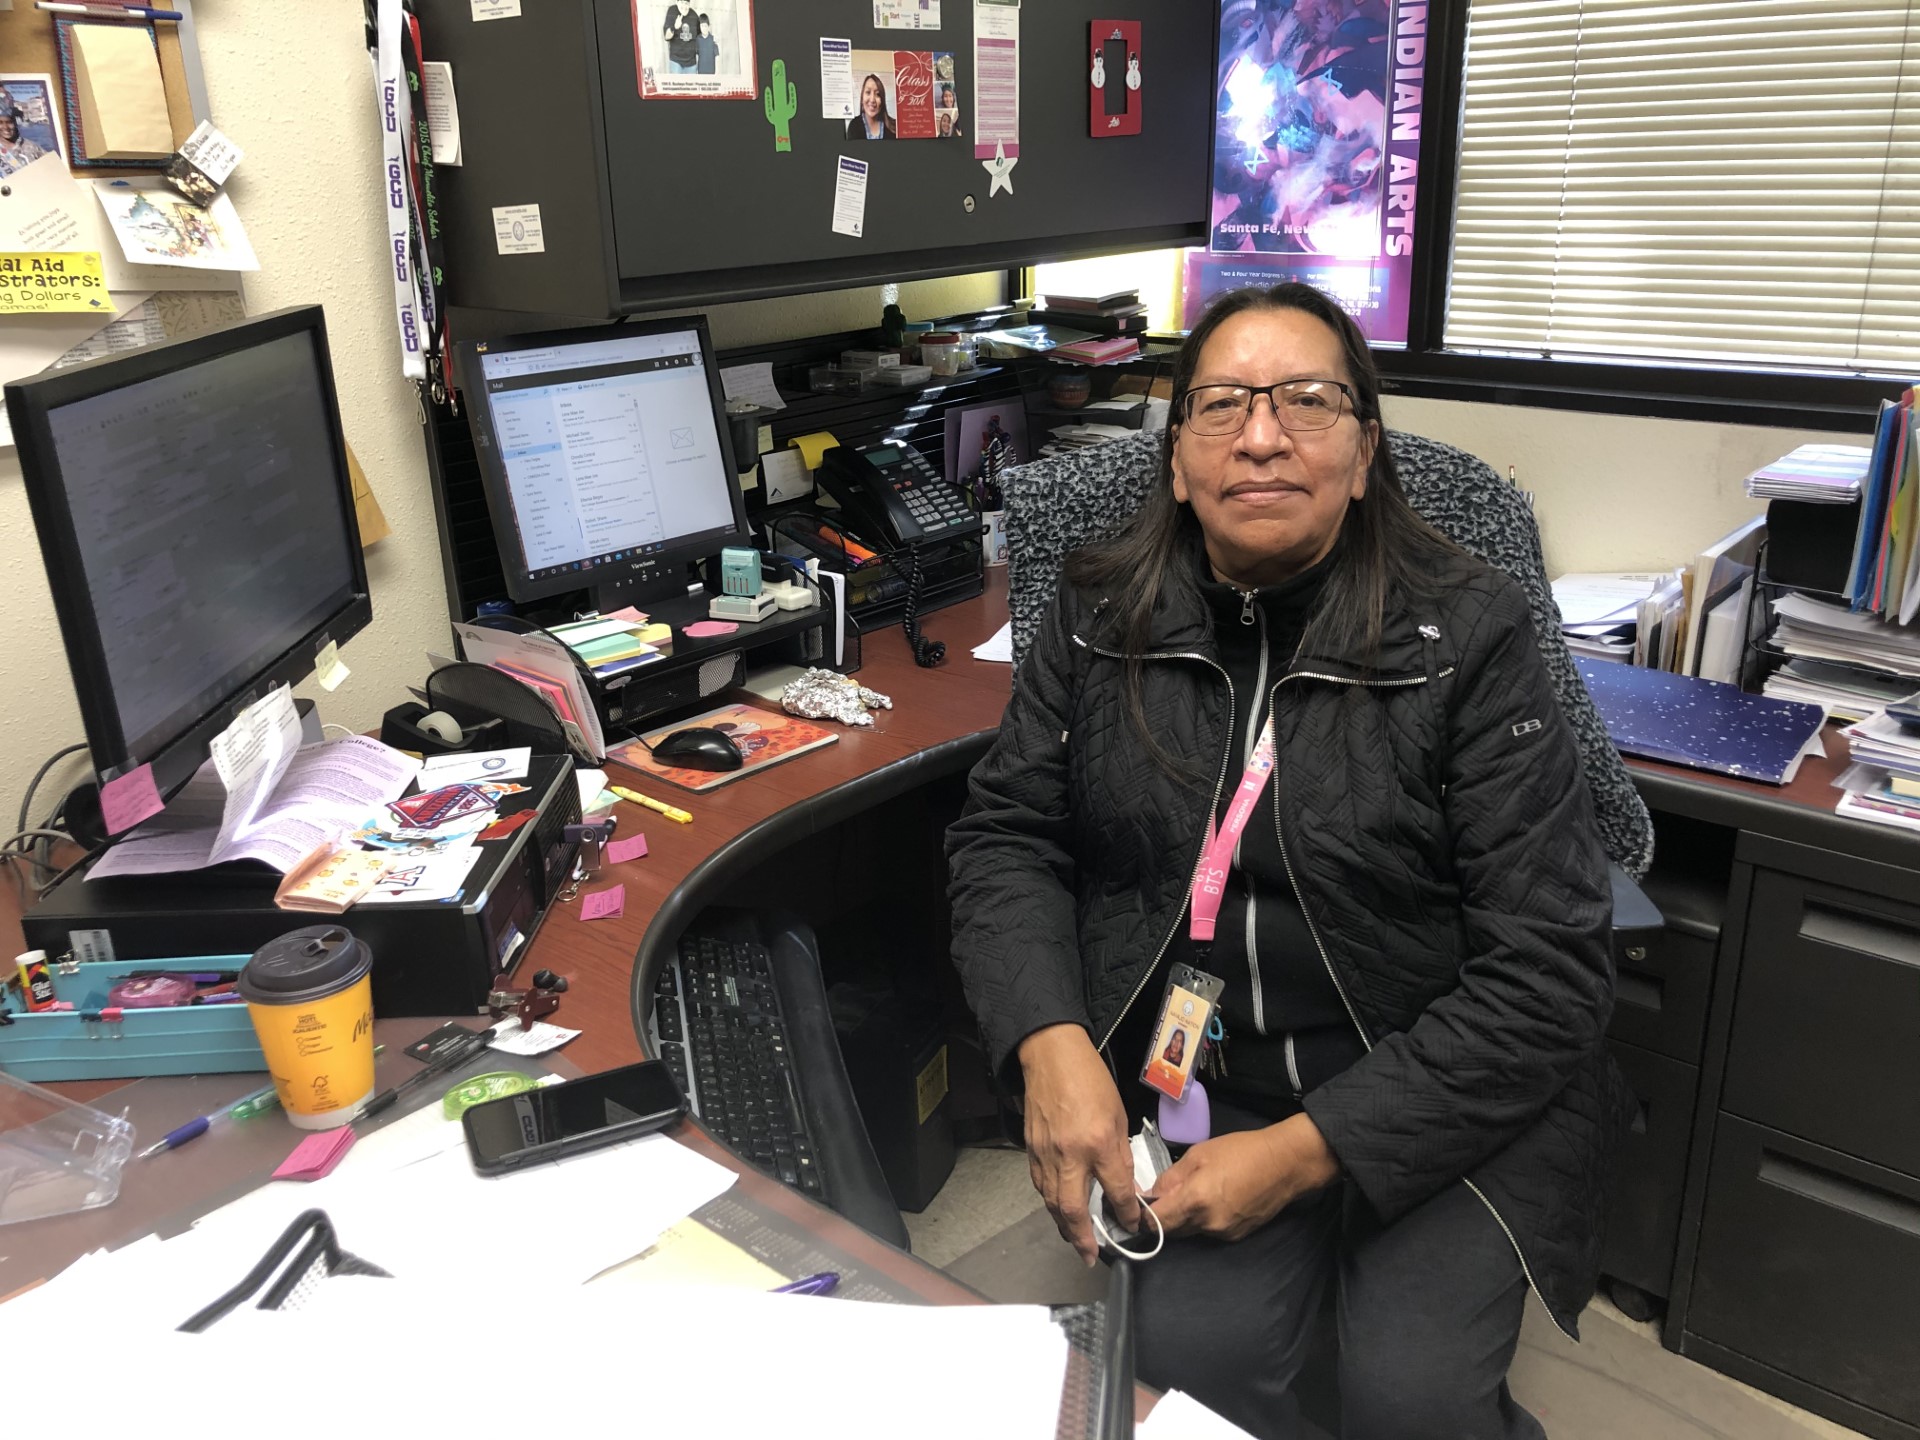 There she met with Maxine Damon of the Navajo Scholarship Office to review the scholarship status of Navajo students who are currently enrolled in the Fielding EdD degree.